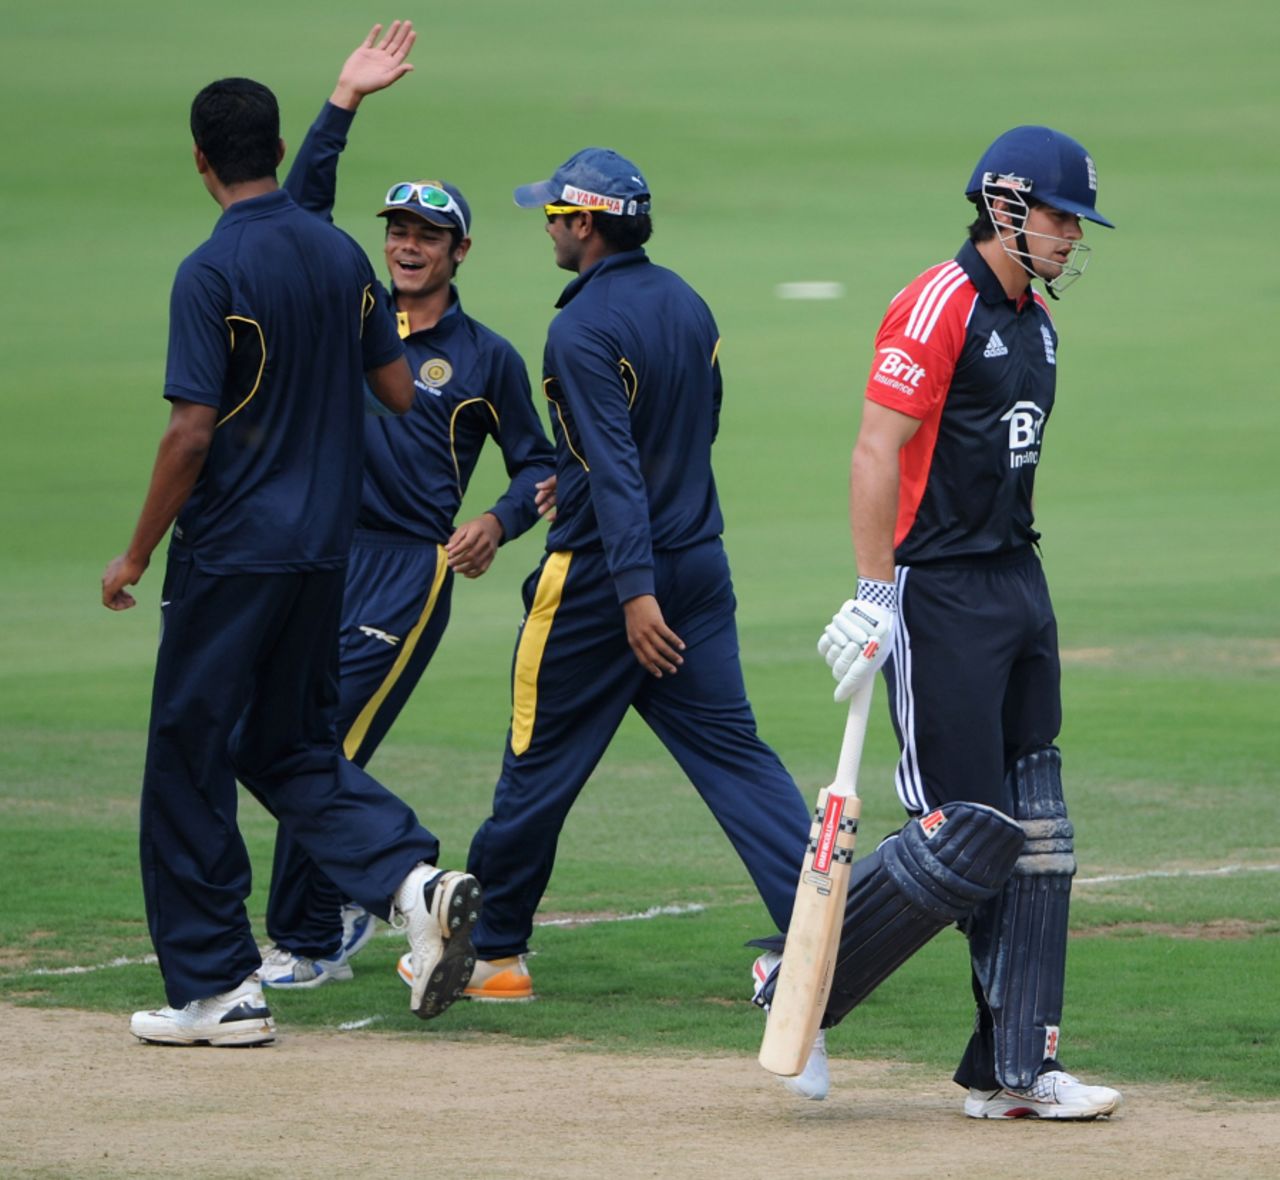 The Hyderabad XI celebrate Alastair Cook's downfall, Hyderabad Cricket Association XI v England XI, Tour Match, Hyderabad, October 8 2011